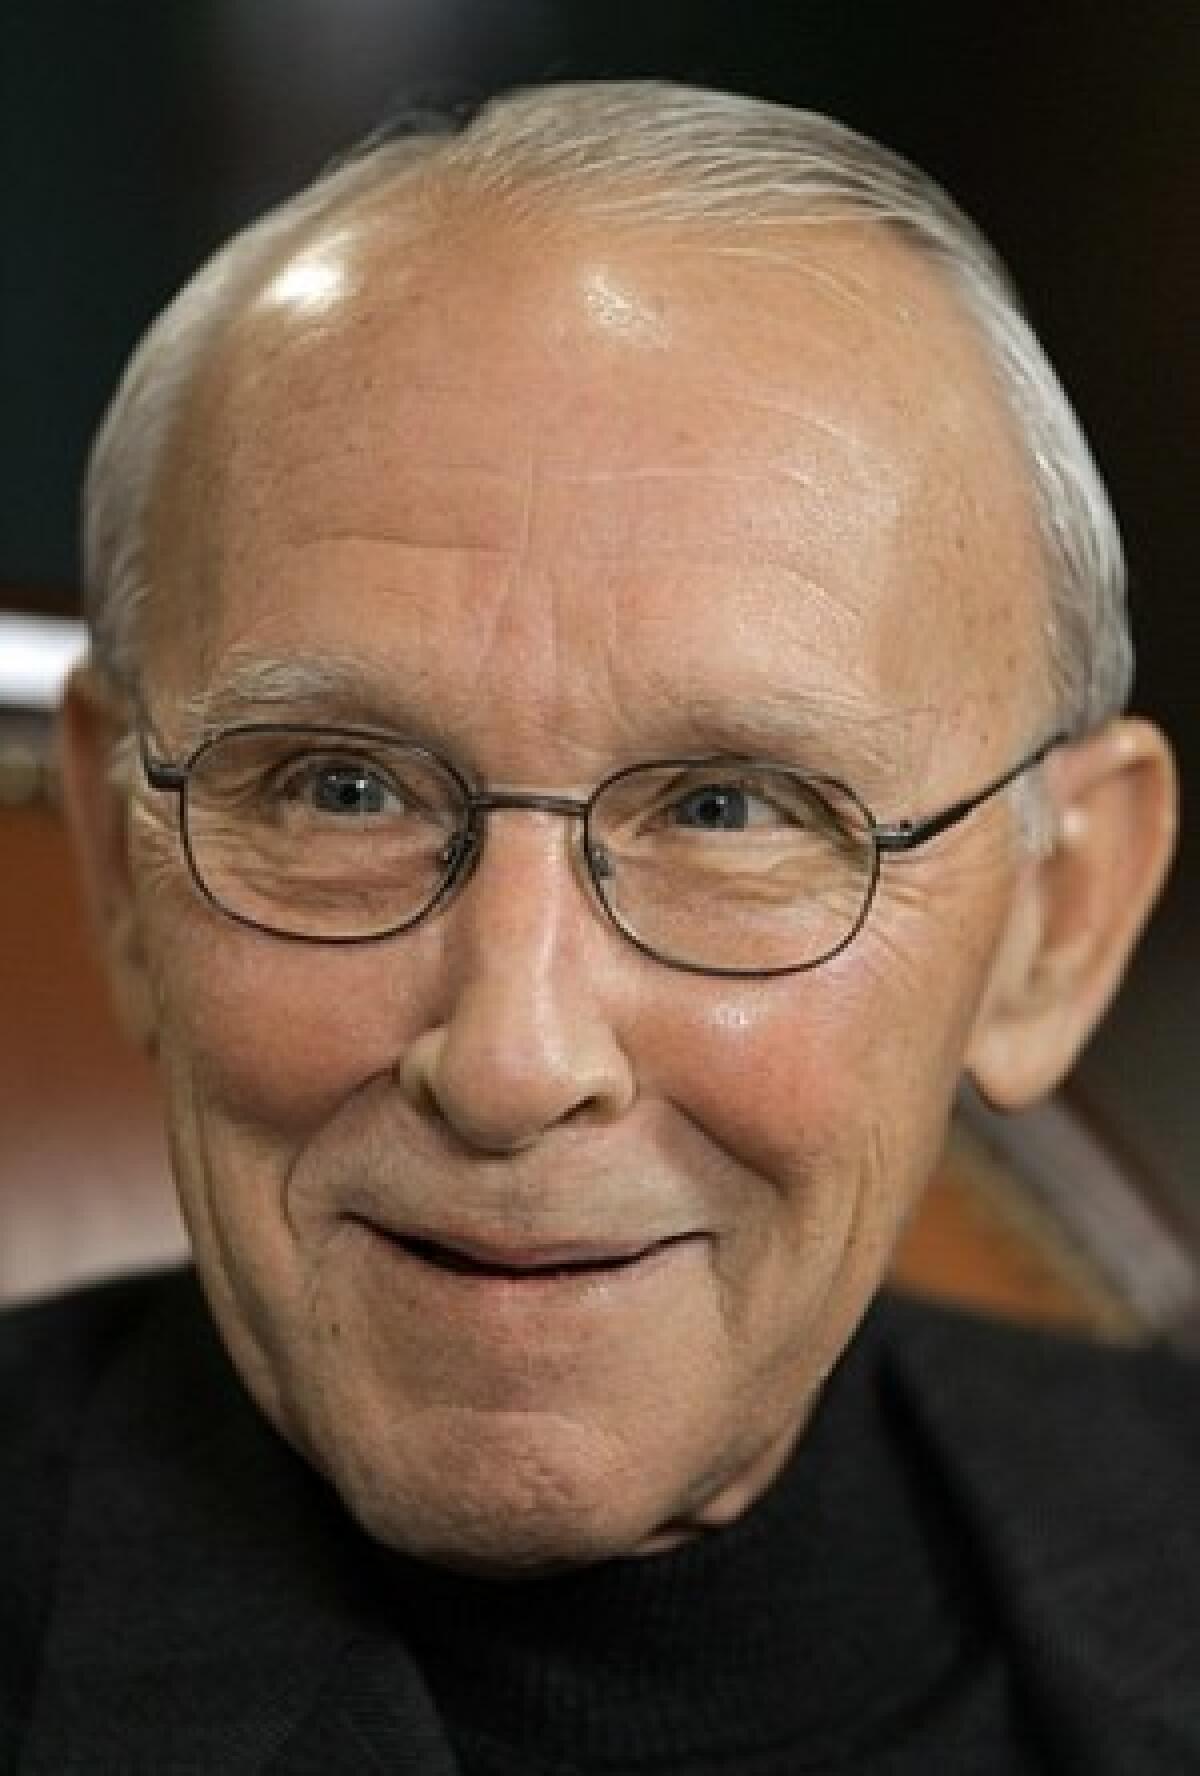 Jerome York worked for all three Detroit automakers, starting in the 1960s. As Chrysler's chief financial officer from 1990 to 1993, he helped restore the No. 3 automaker to profitability with cost cuts and asset sales. In 2006, three years before GM went into bankruptcy protection, he warned the company that its business model was seriously flawed.